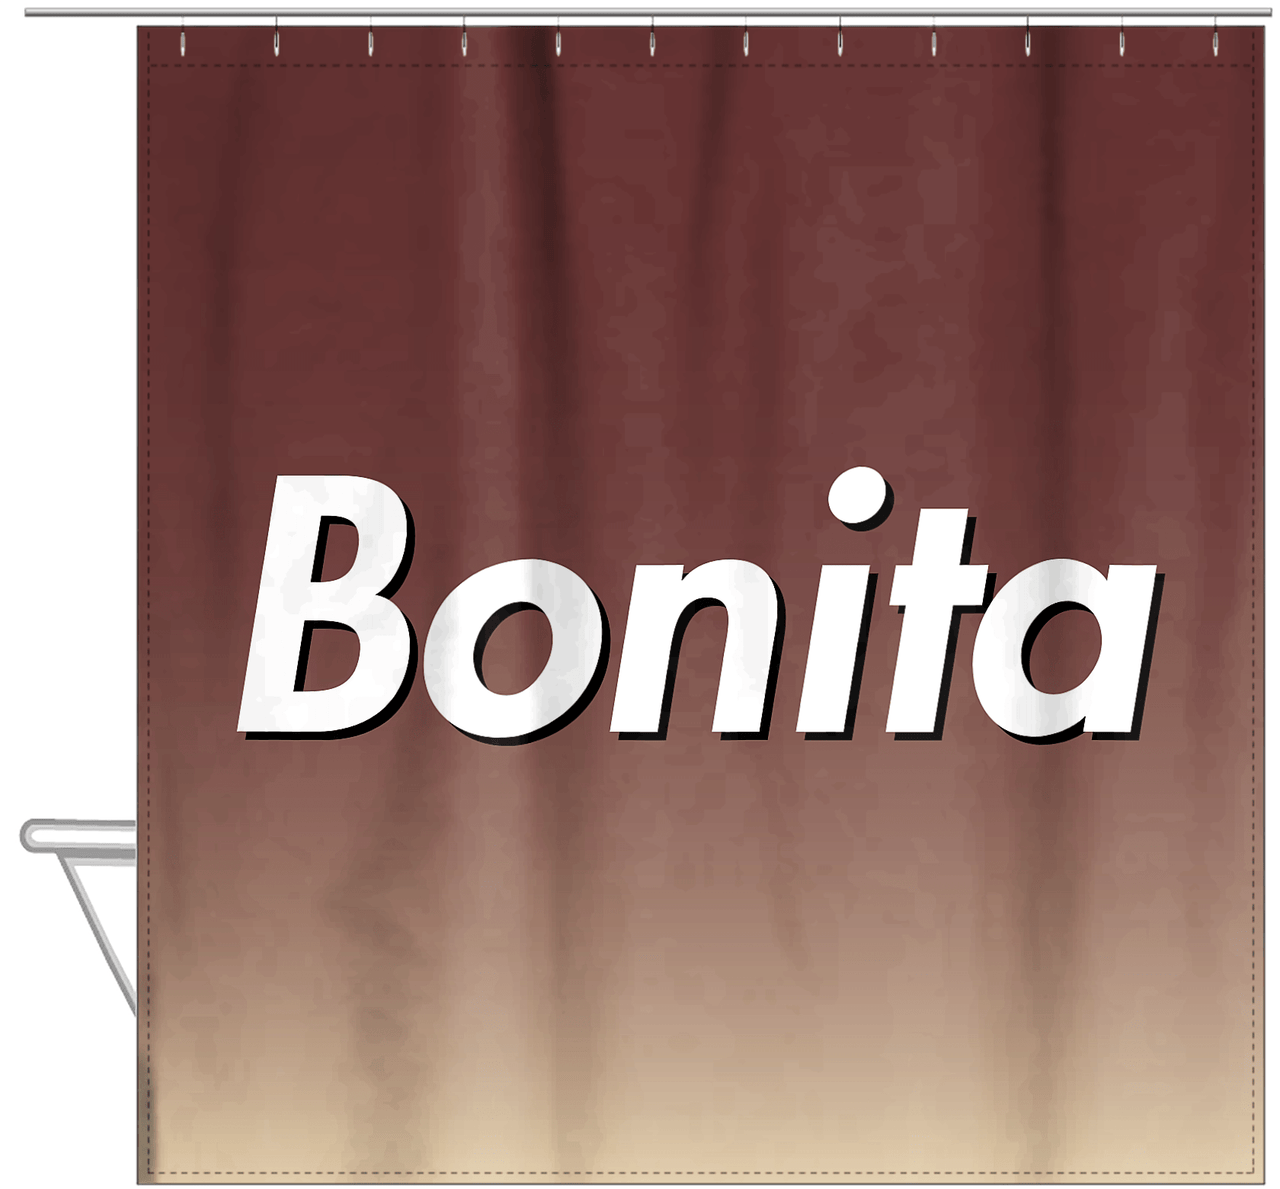 Personalized Ombre Shower Curtain - Brown and Tan - Hanging View